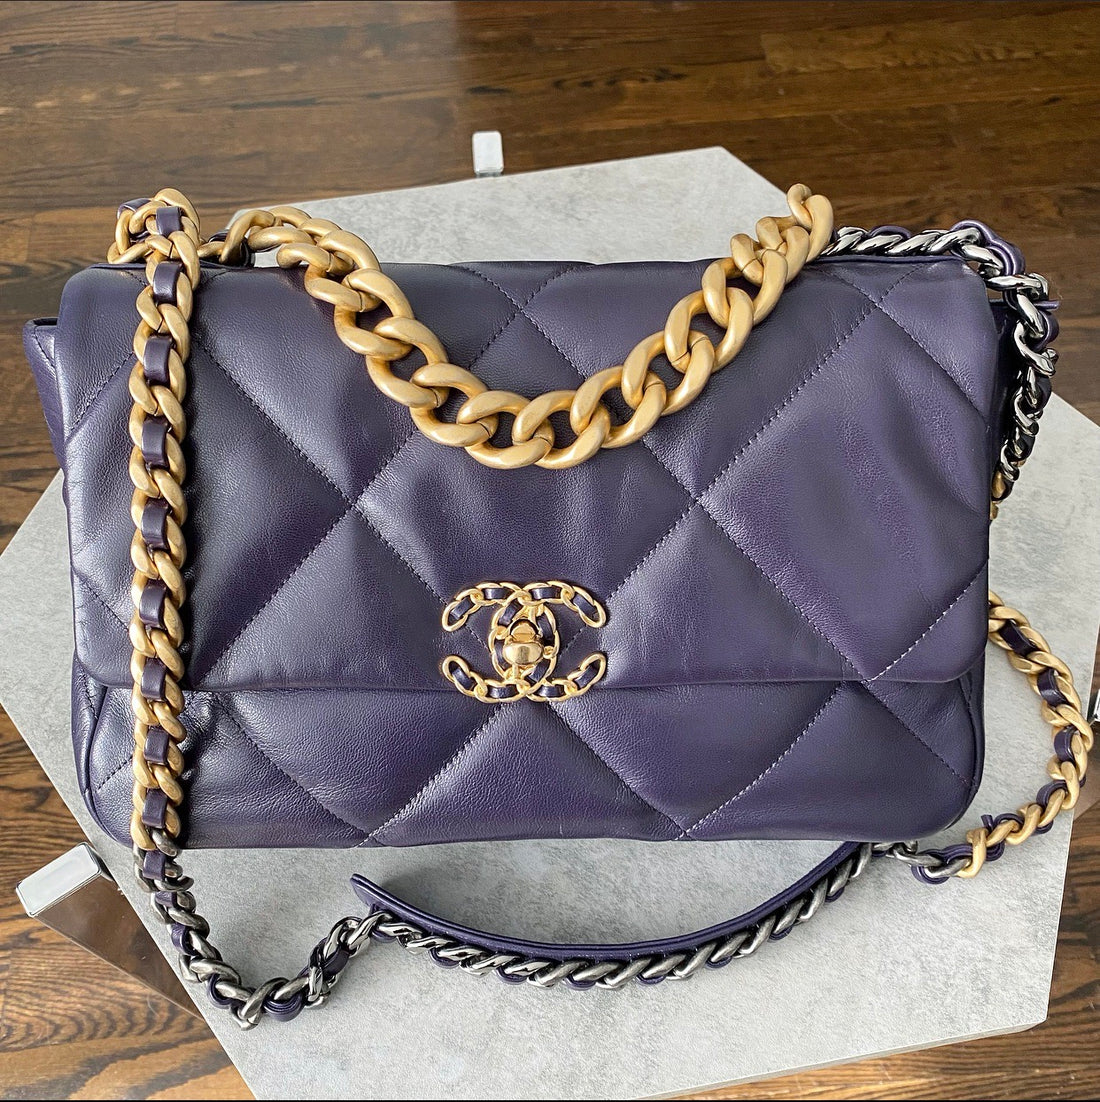 Chanel 19 Flap Bag Quilted Leather Medium Purple 2103781